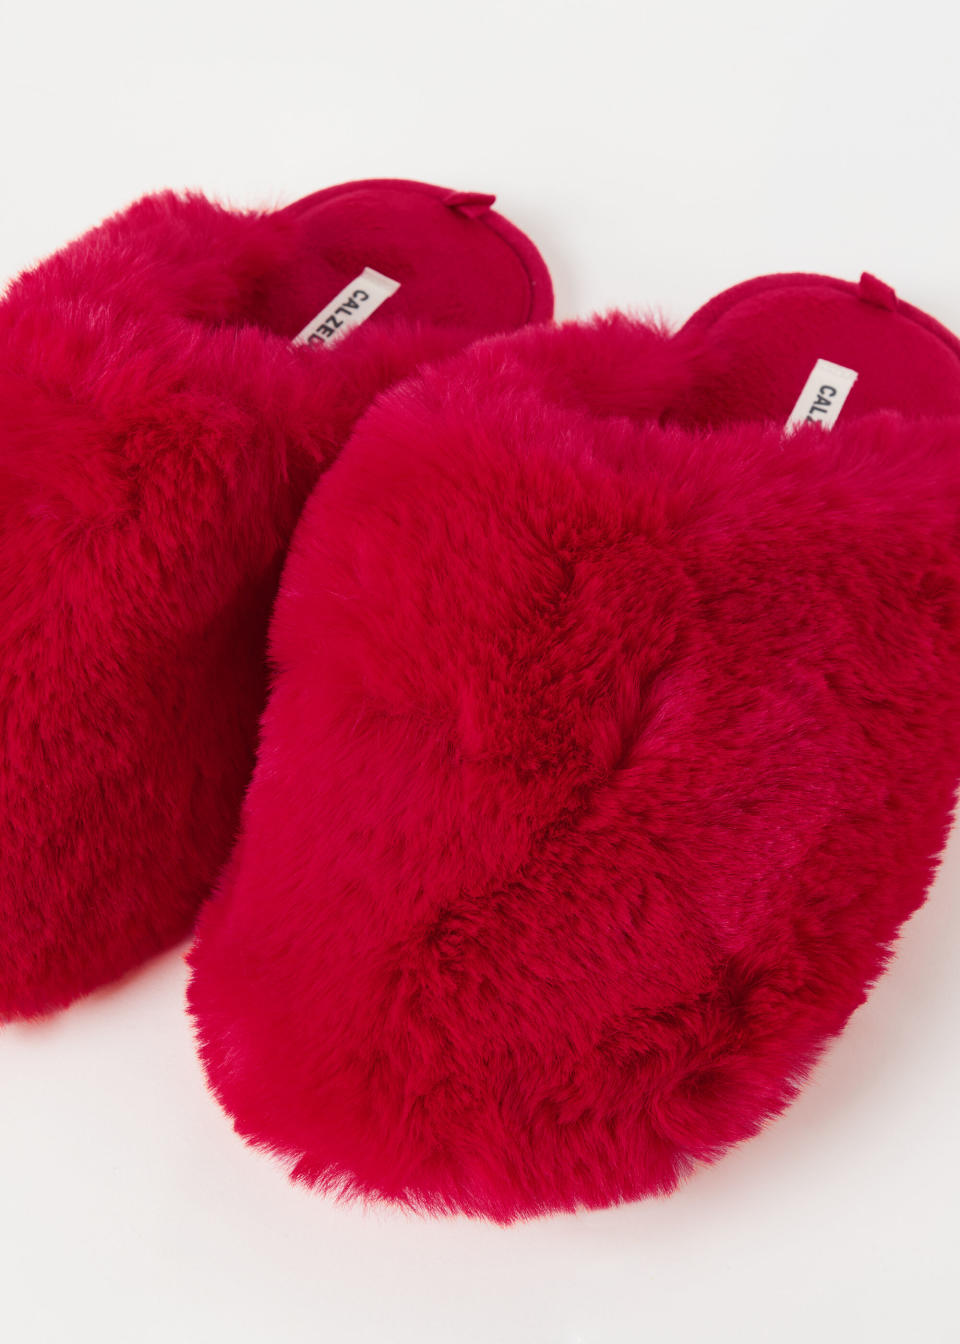 red fuzzy slippers